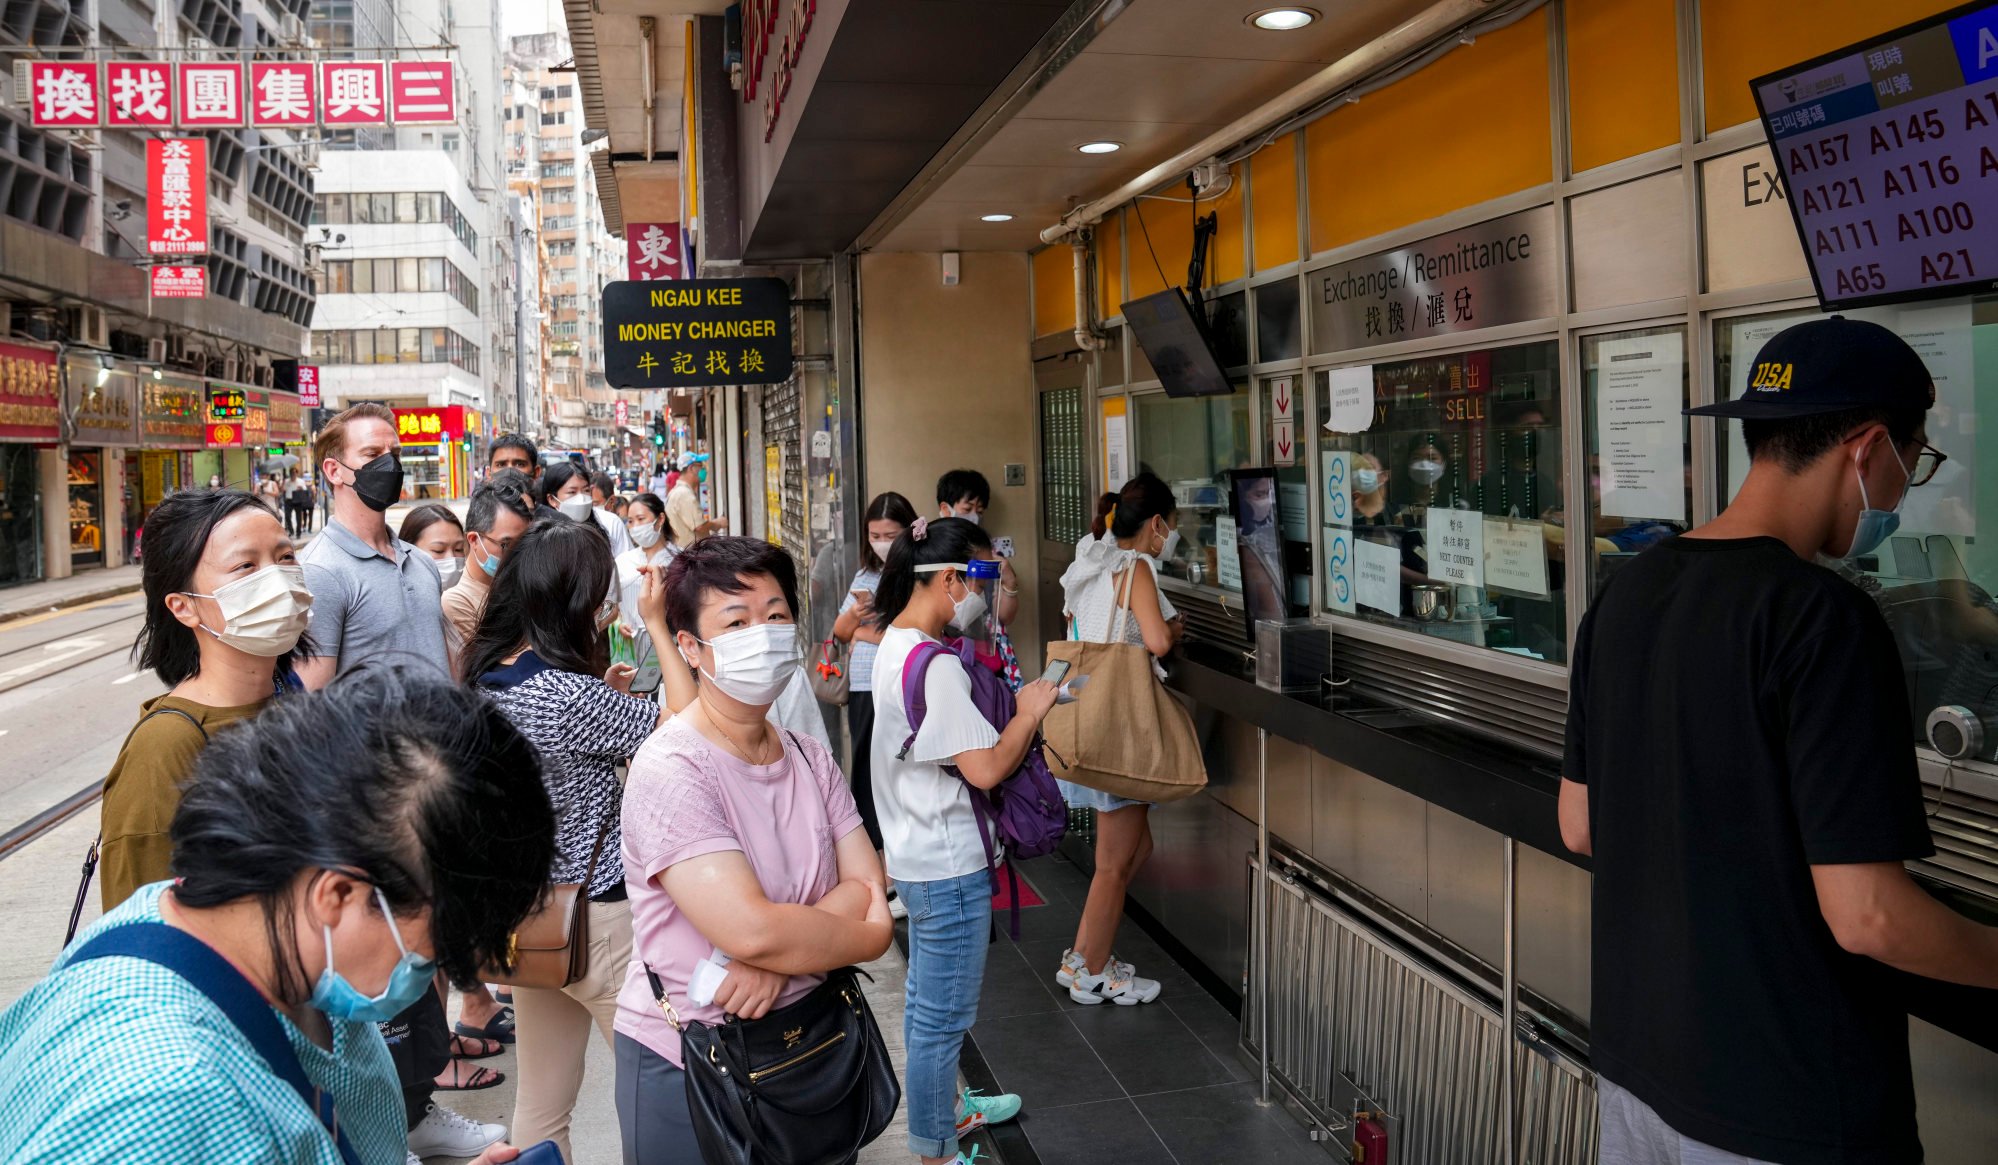 People queue up outside a currency exchange shop in Sheung Wan. Photo: Sam Tsang.